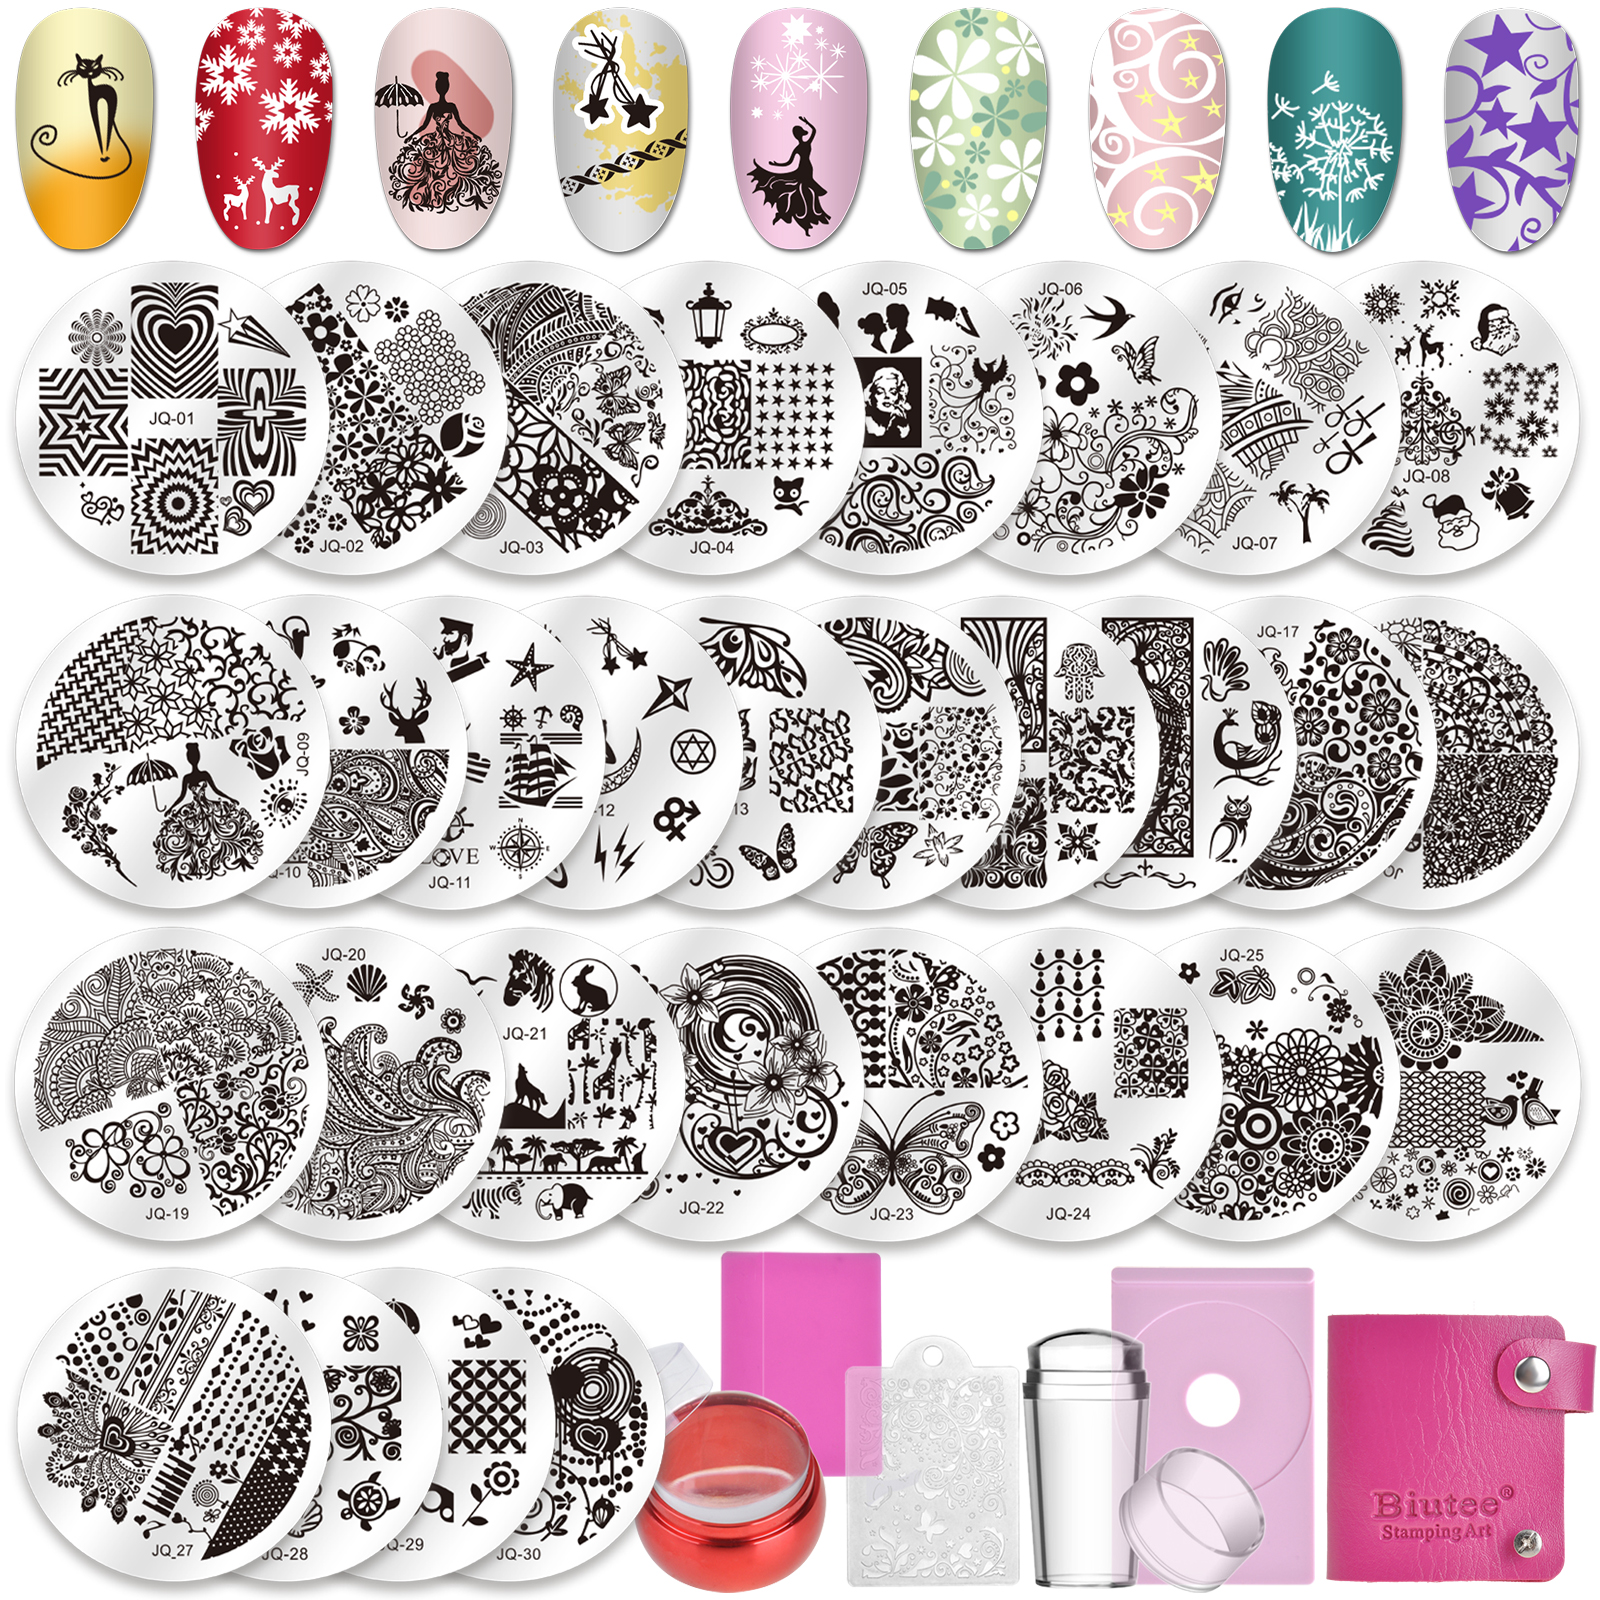 Biutee 36pcs Nail Stamper Set, 30pcs Nail Stamping Plates with Stamps,  Scrapers & Storage Bag Stainless Steel Nail Plate Template 